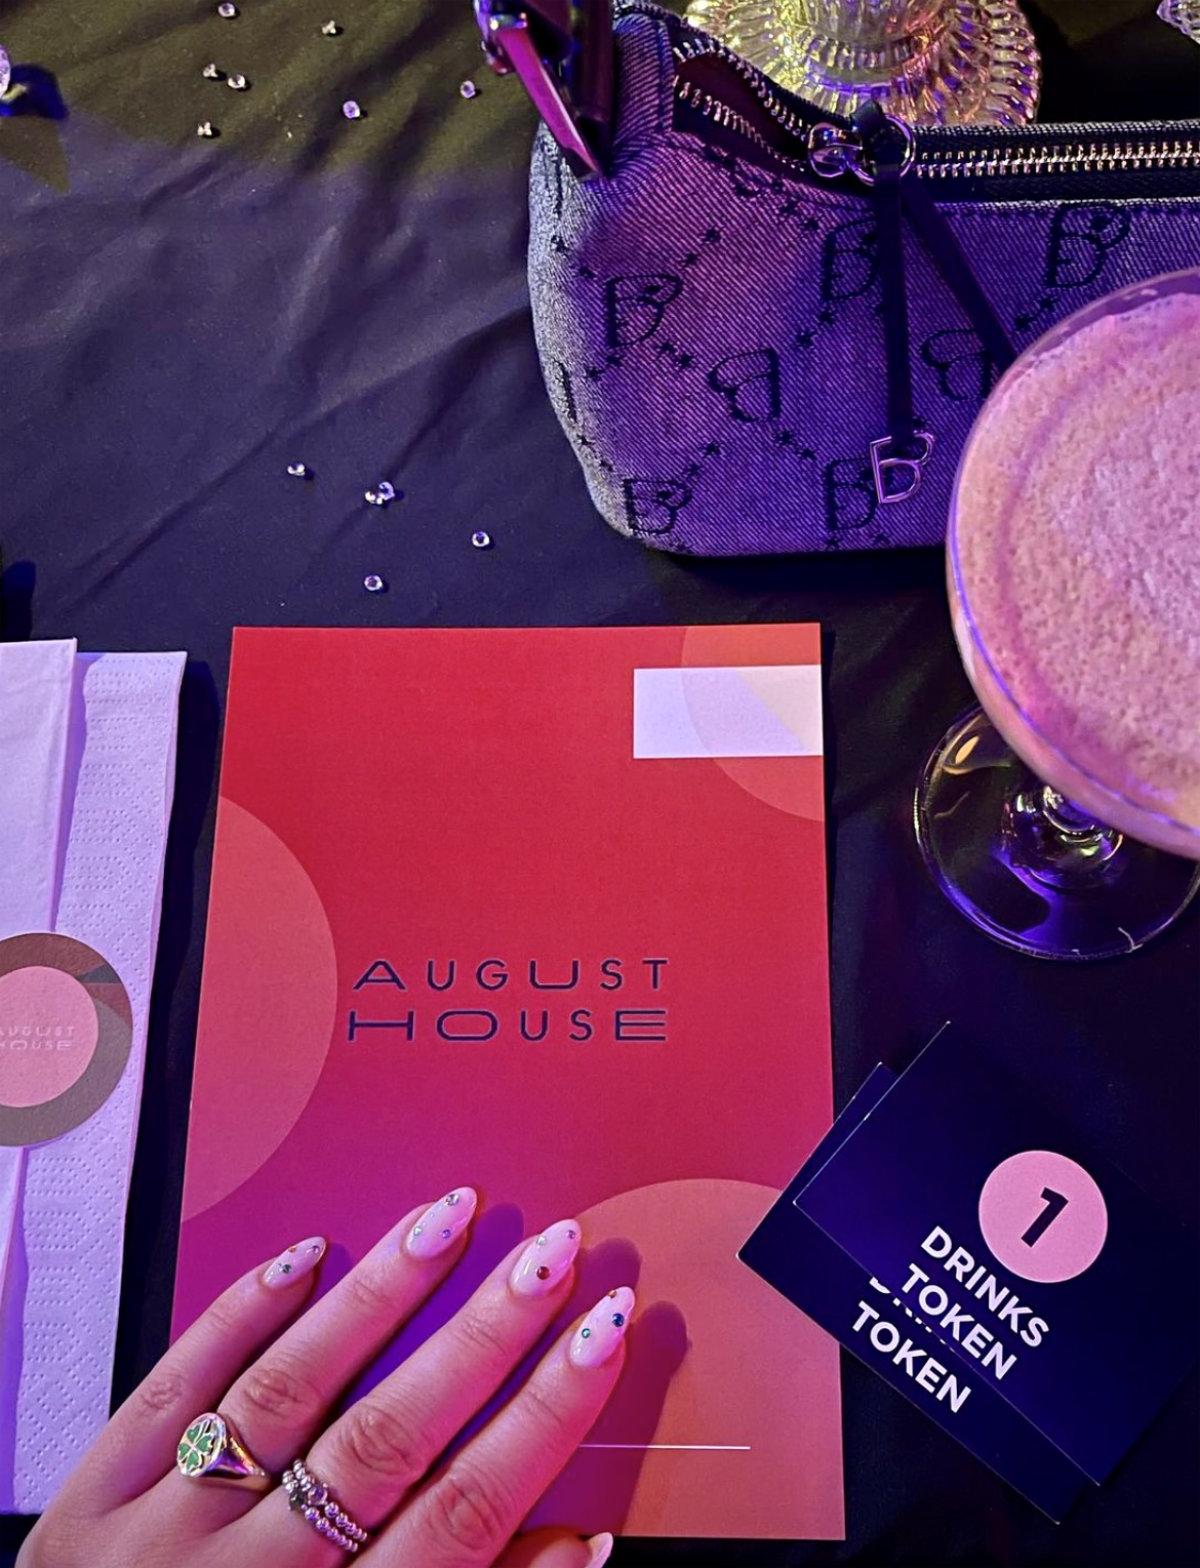 August House launches Glasgow’s ultimate brunch party